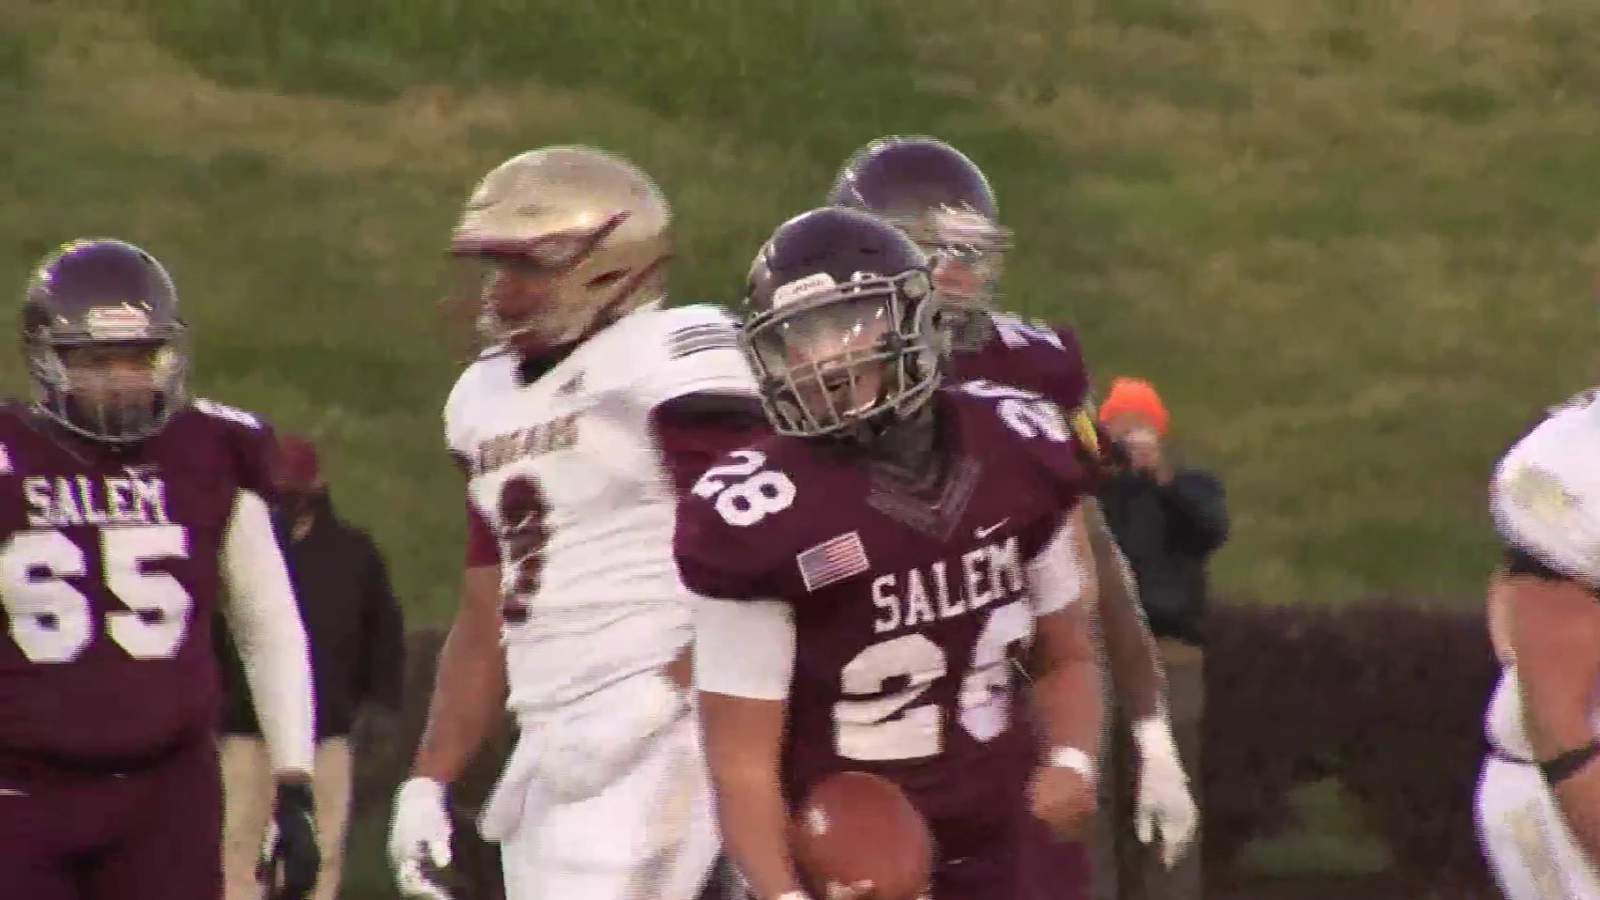 Salem prevails against rival Pulaski County, remaining perfect